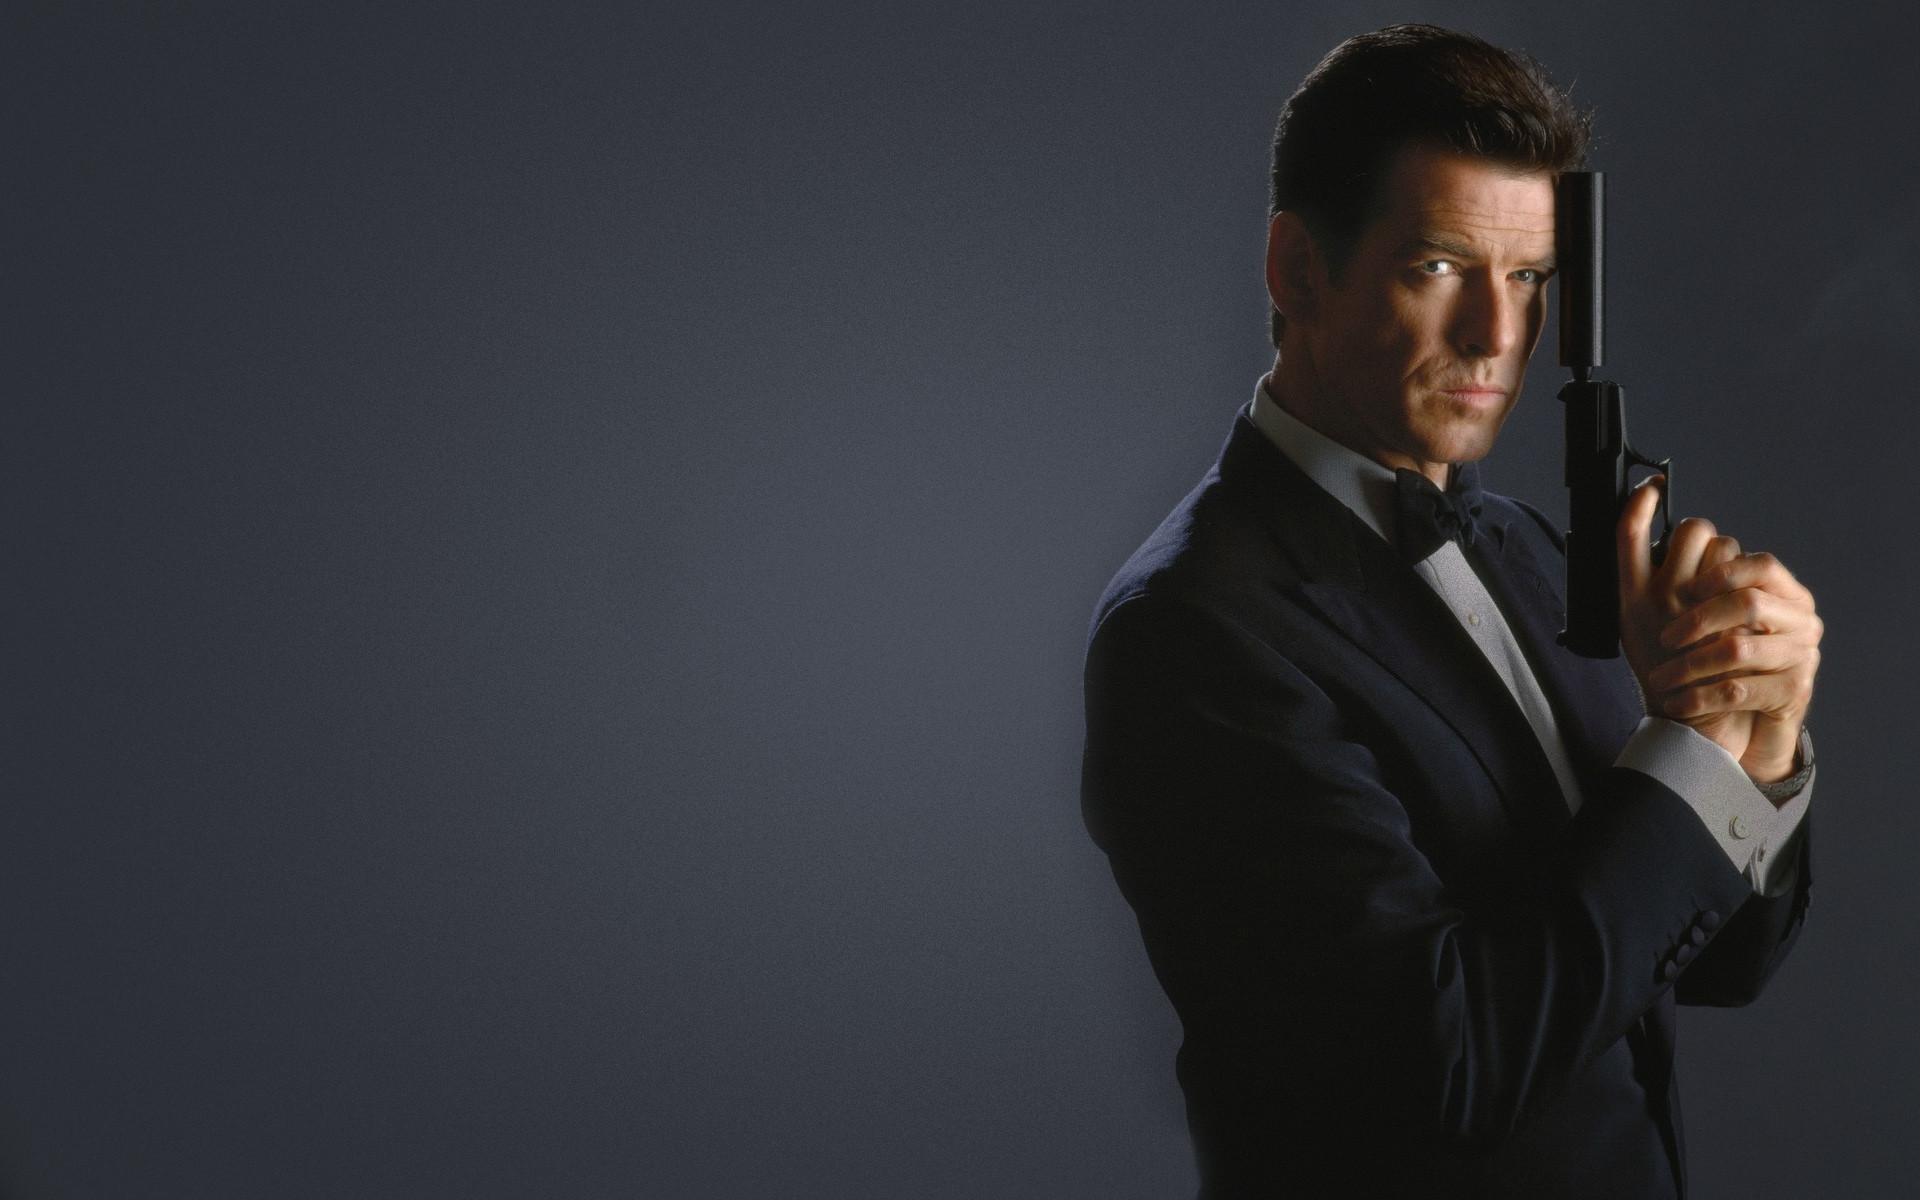 1920x1200 Wallpapers In High Quality - James Bond 007 by Severo Keijser